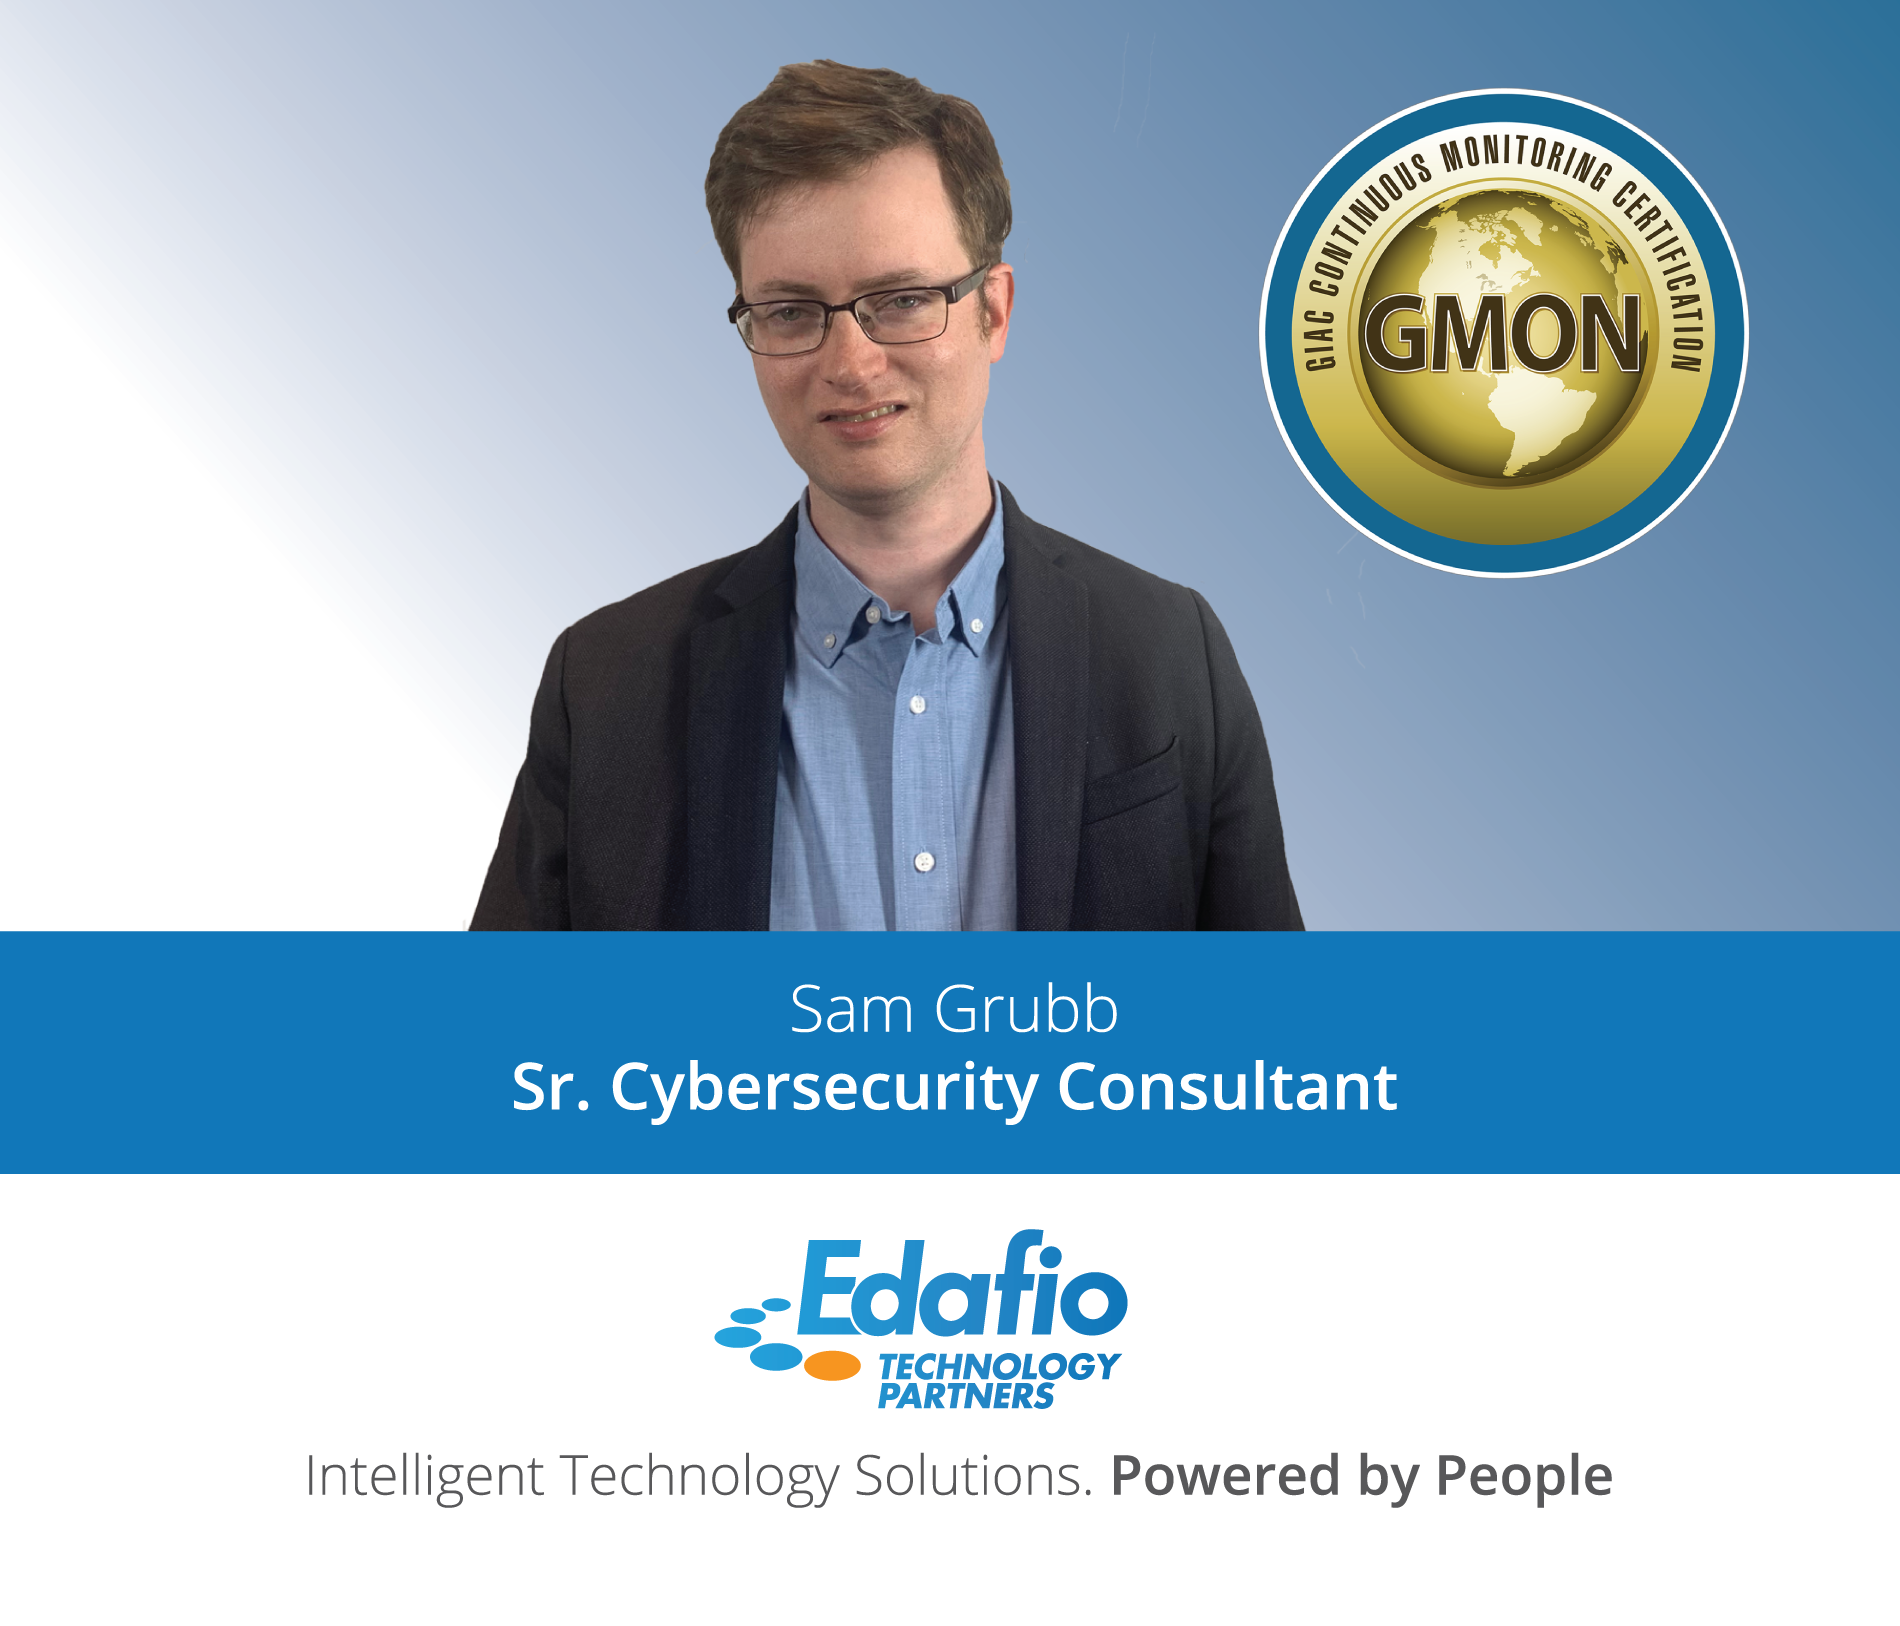 Sam Grubb has earned the highly specialized and significant GIAC Continuous Monitoring Certification (GMON